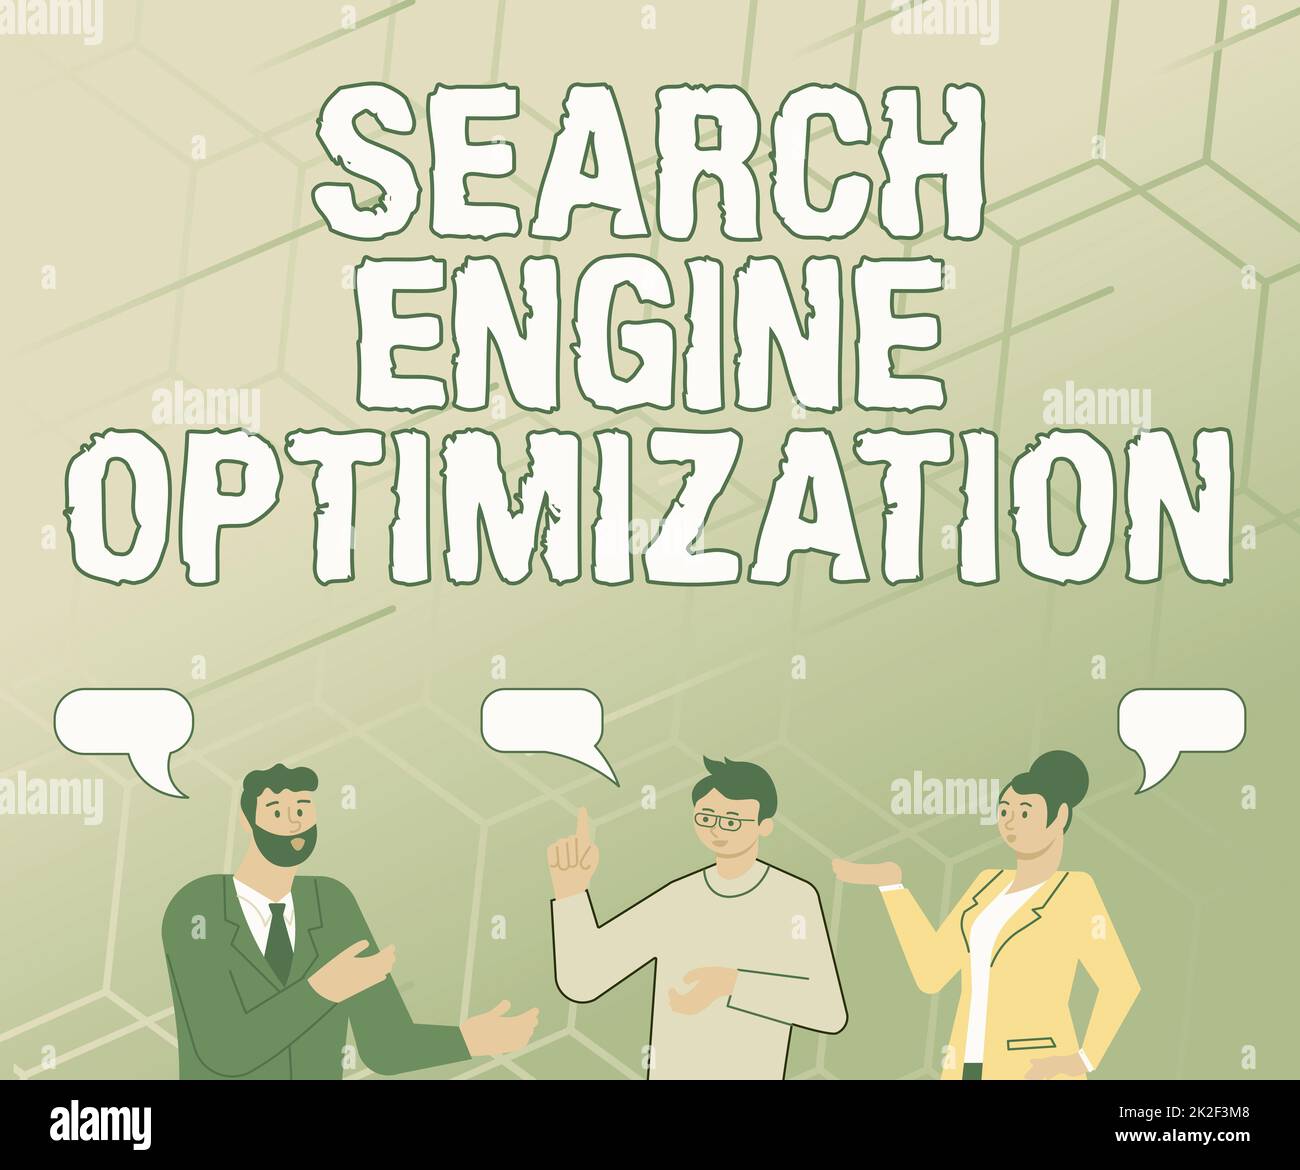 Text showing inspiration Search Engine Optimization. Business idea Increase of business website traffic and analytics Partners Chatting Building New Wonderful Ideas For Skills Improvement. Stock Photo